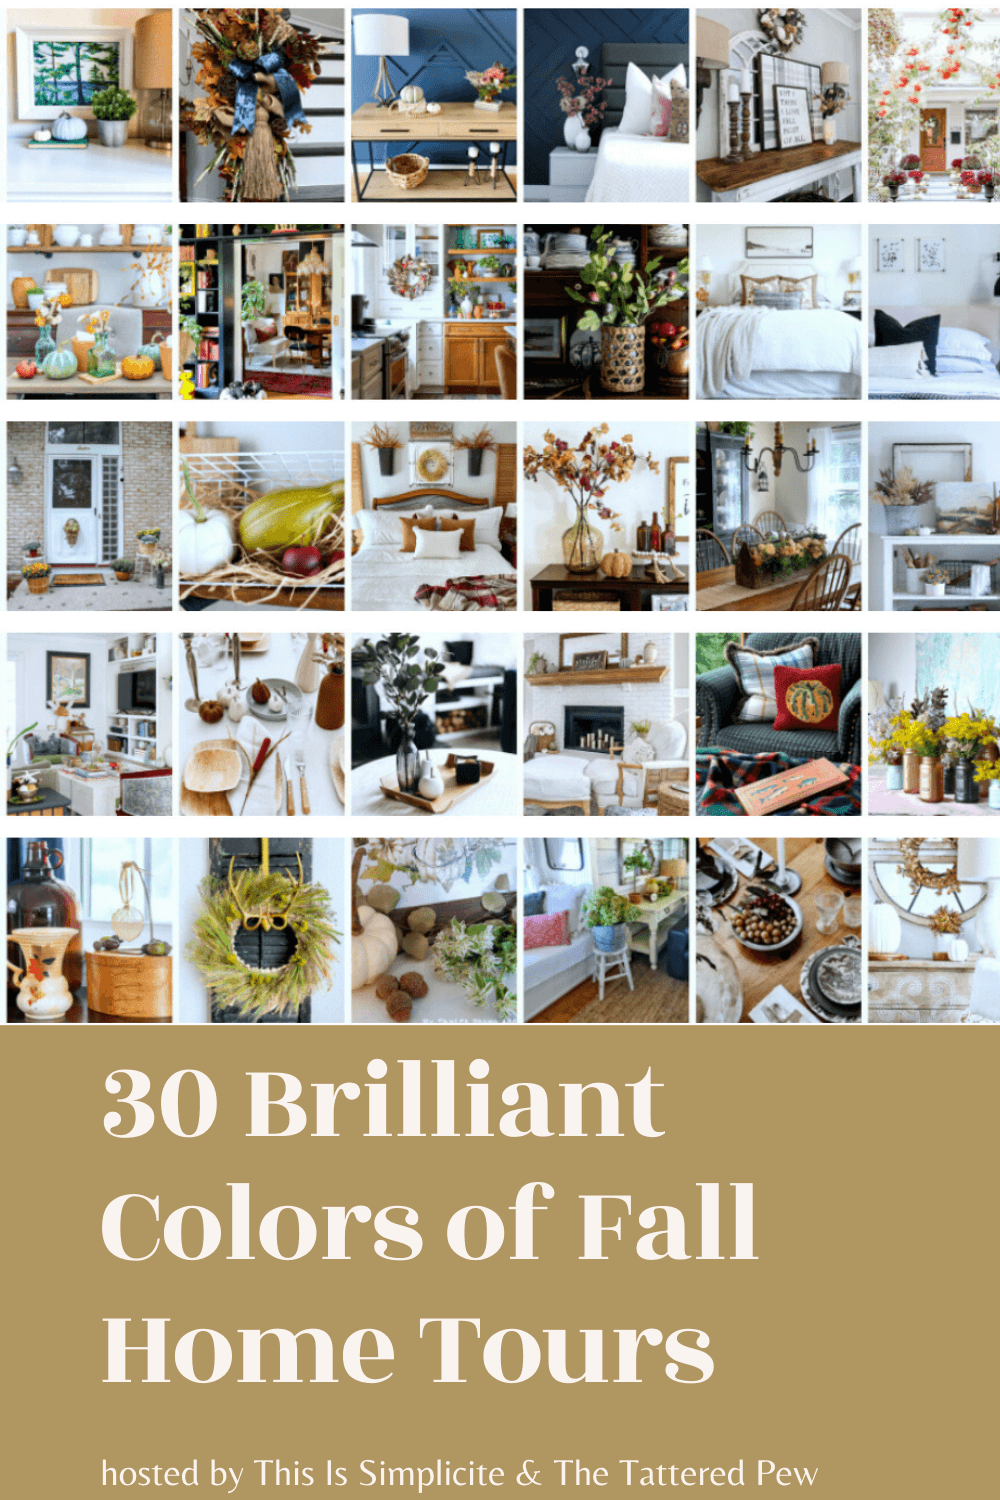 Graphic for Brilliant Colors of Fall Home Tours